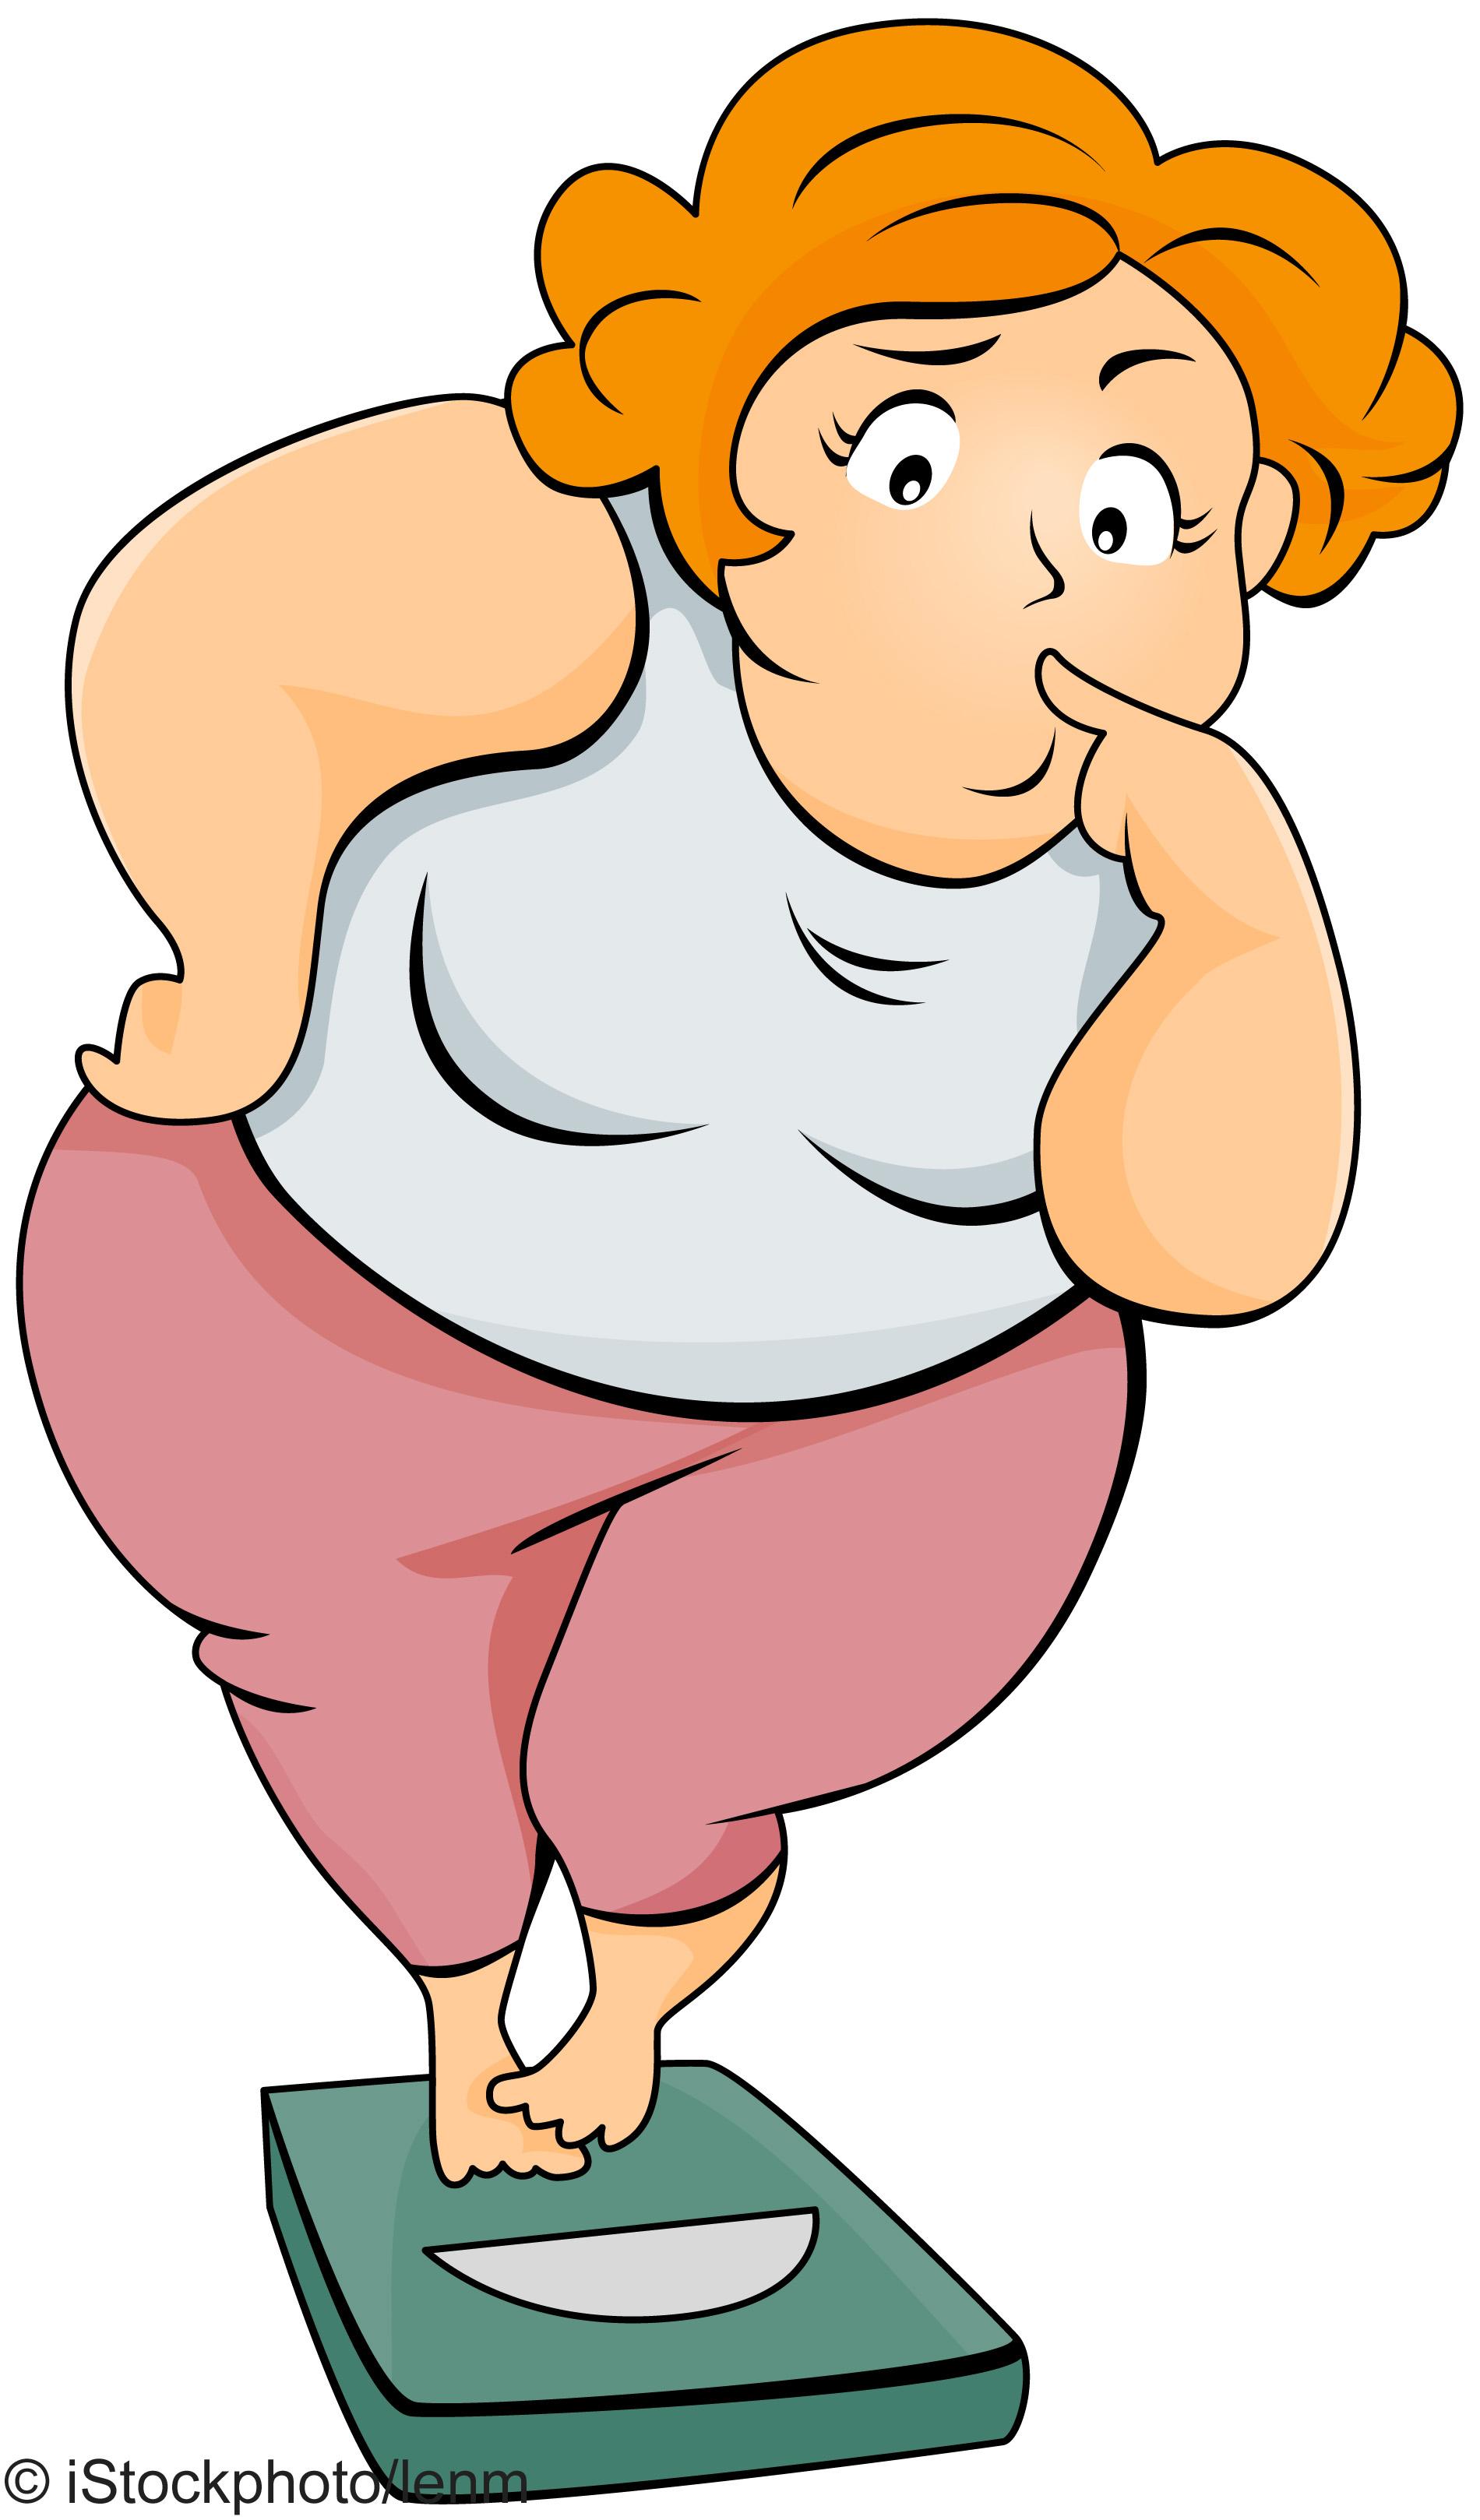 Obesity Clipart Group with items